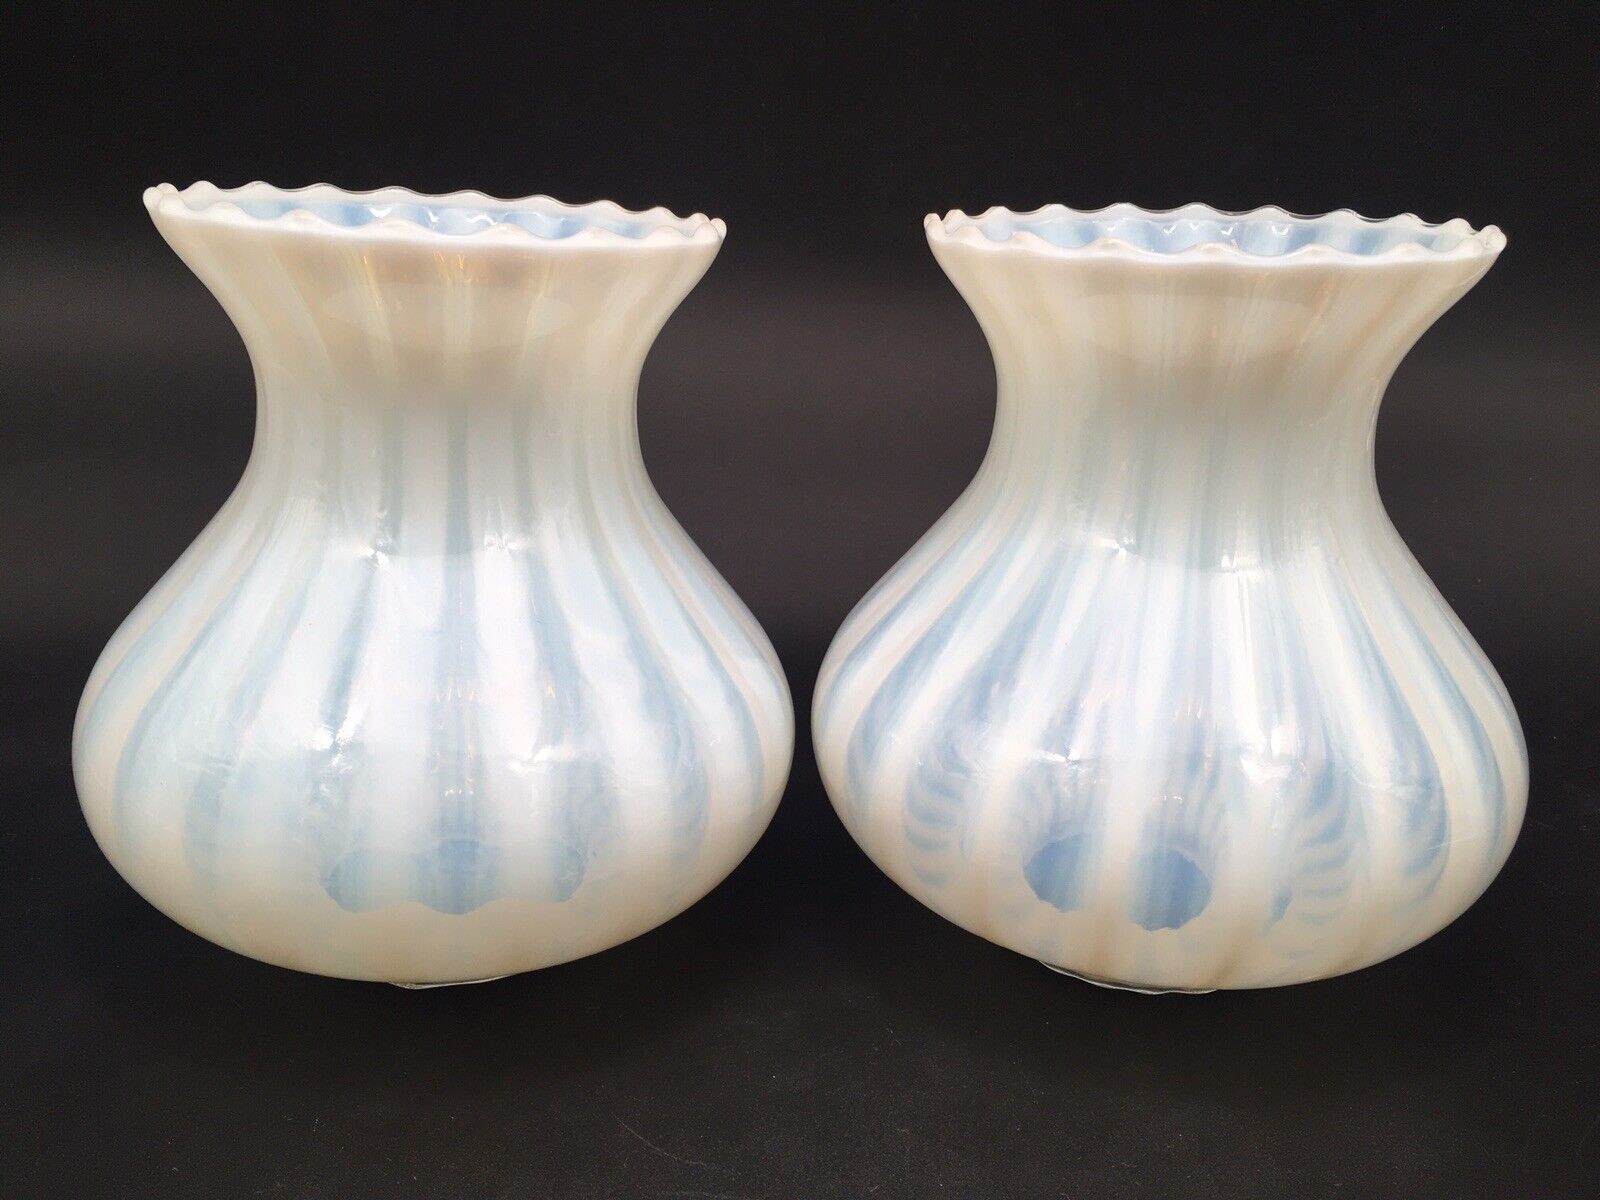 Pair (2) of White Opalescent Striped Glass Lamp Shades Vintage